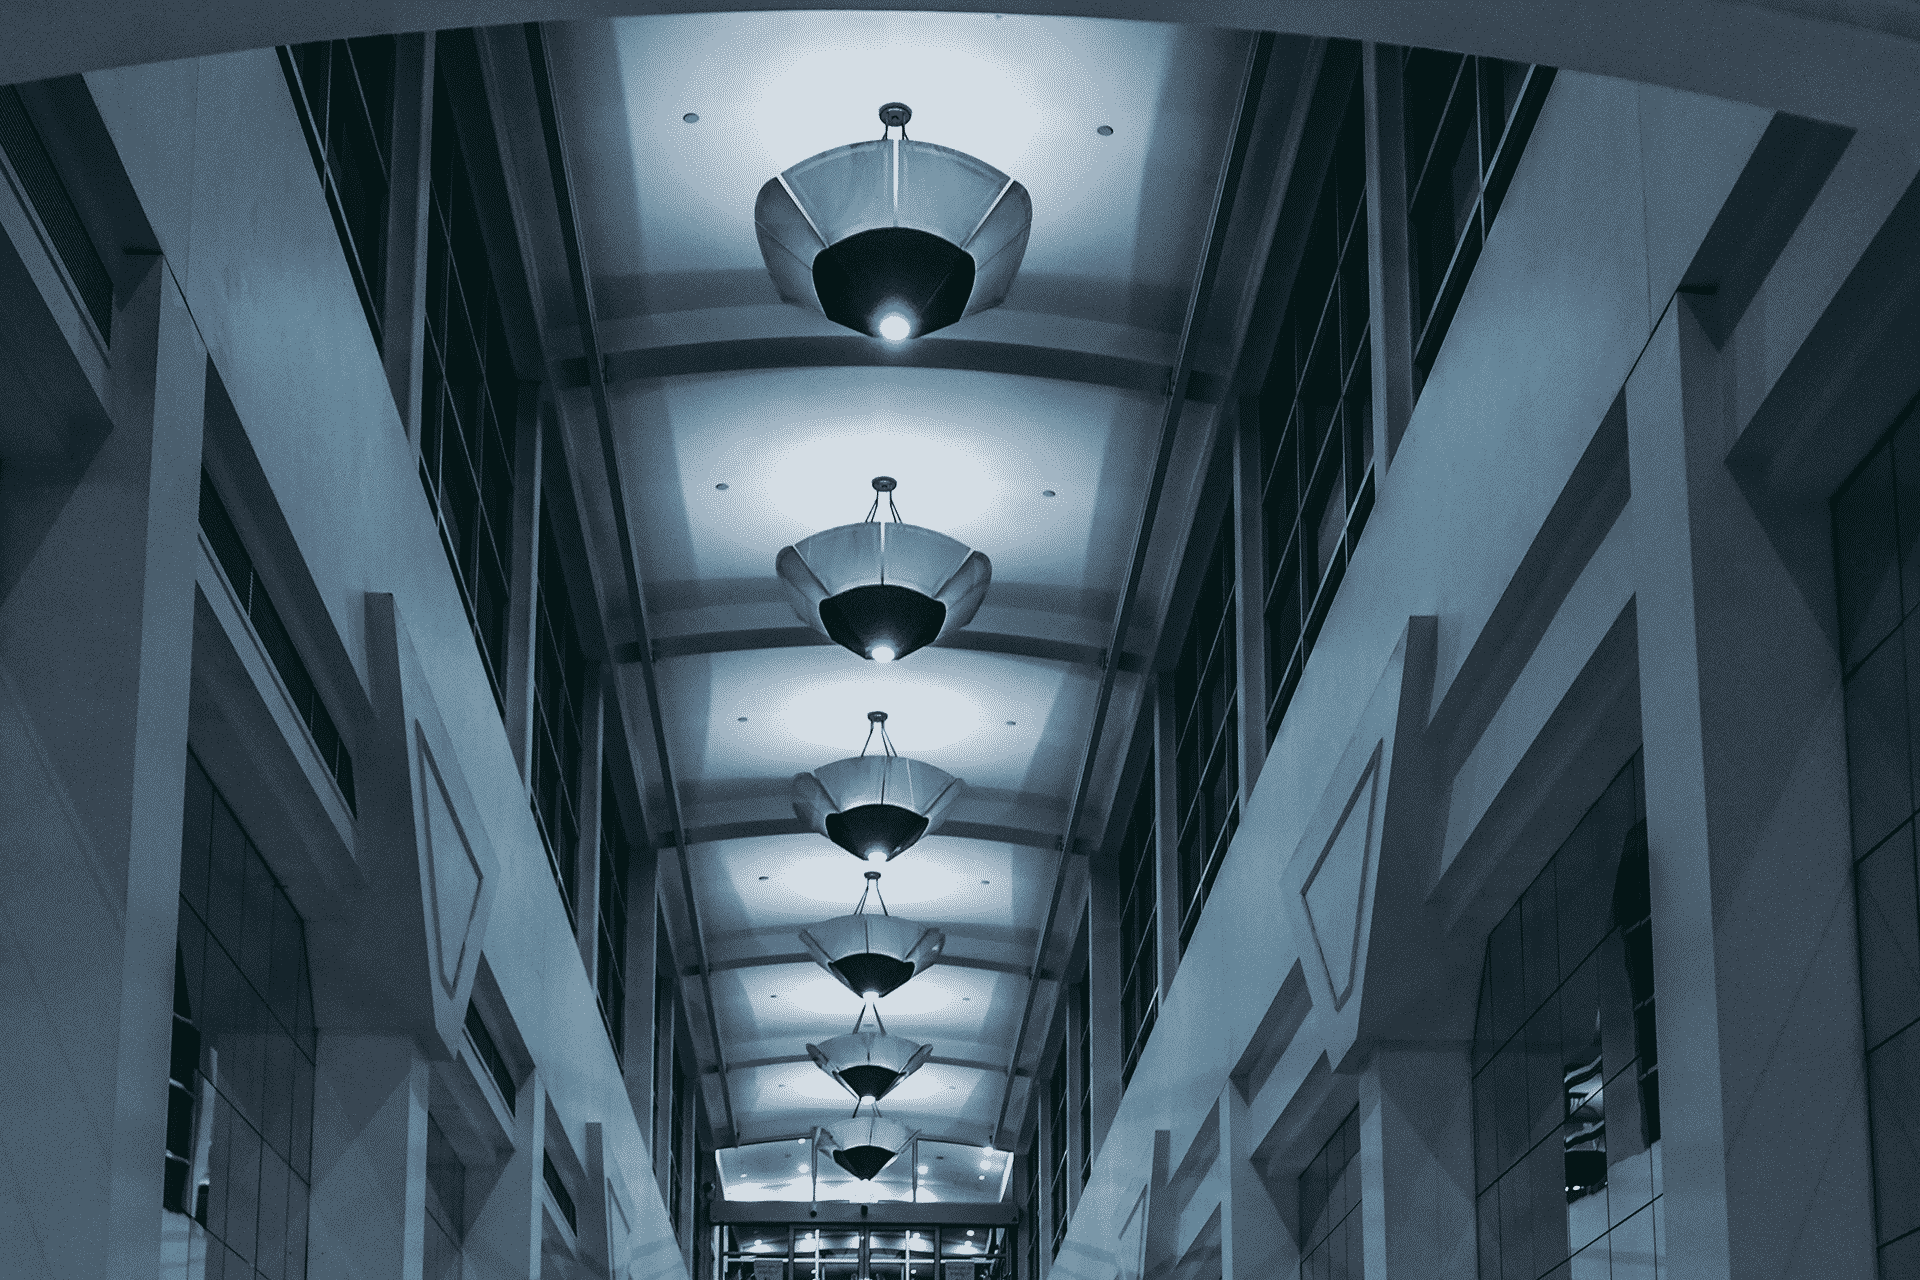 interior of a commercial roof with decorative lanterns handing